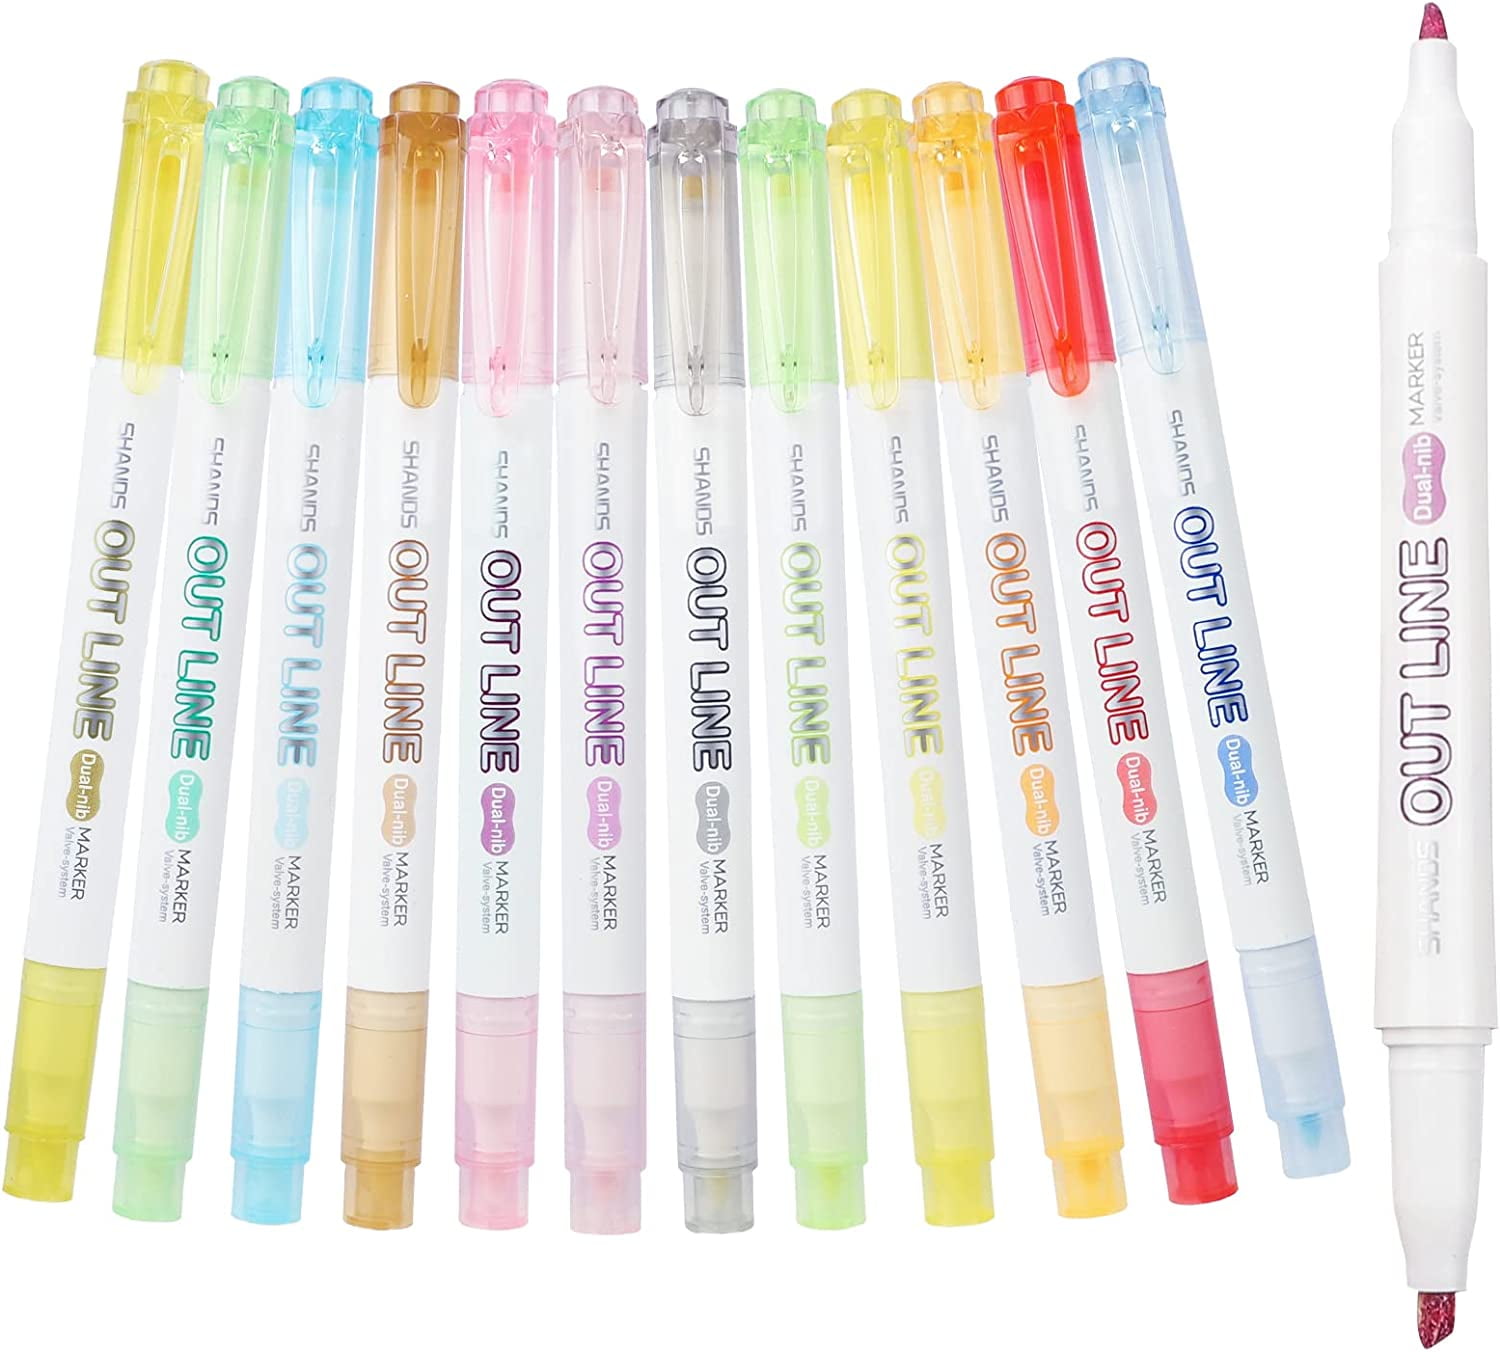 ZEYAR Highlighters, Dual Tips Marker Pen, Chisel and Fine Tips, 6 Candy Colors, Water Based, Assorted Colors, Quick Dry (6 Candy Colors)